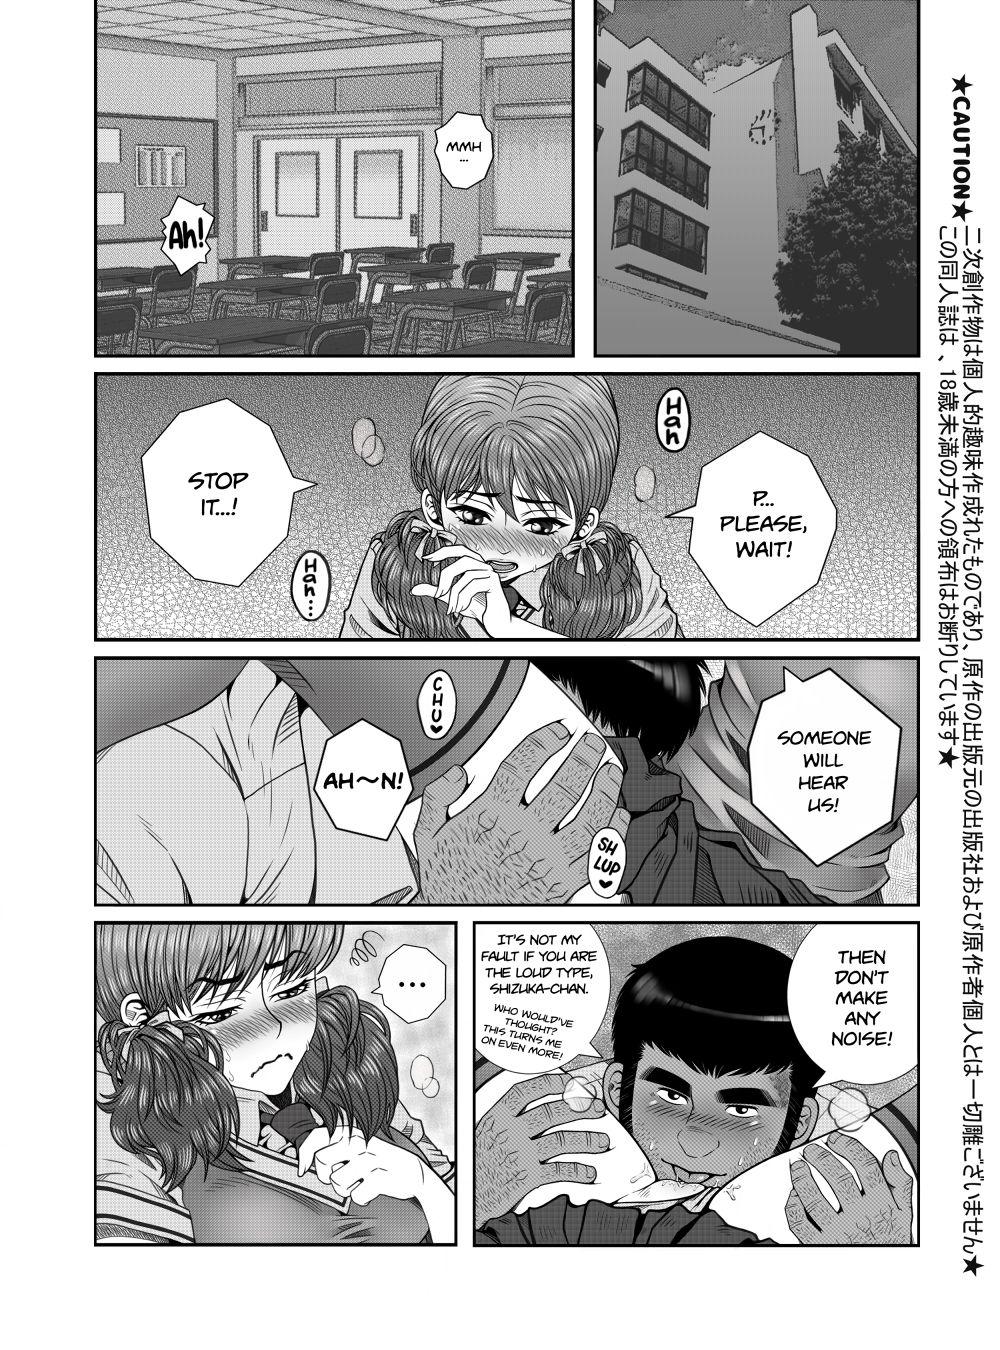 Family Sex Too late - Doraemon Amature - Page 2